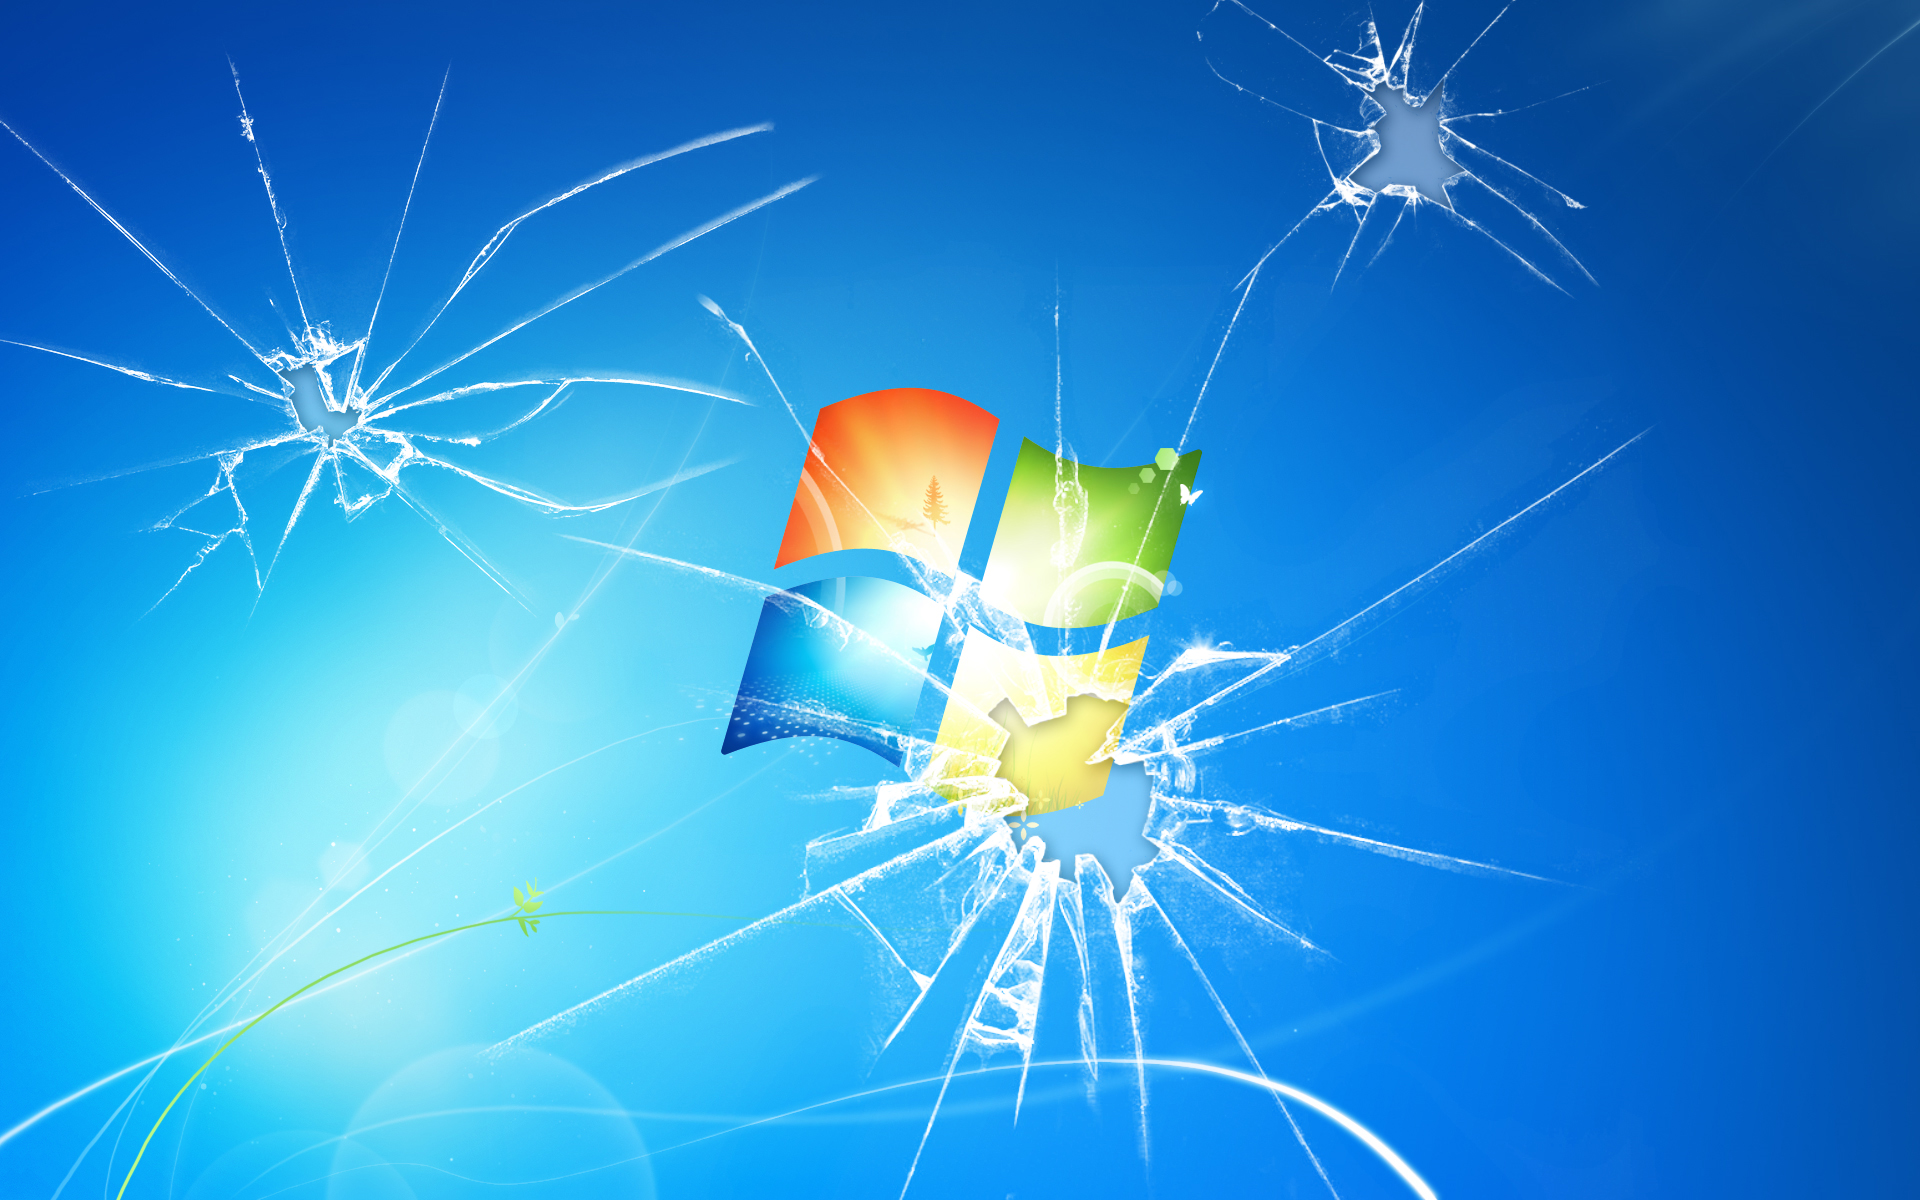 Wallpaper Mac Pc Os A Broken Windows Background Tribute To My